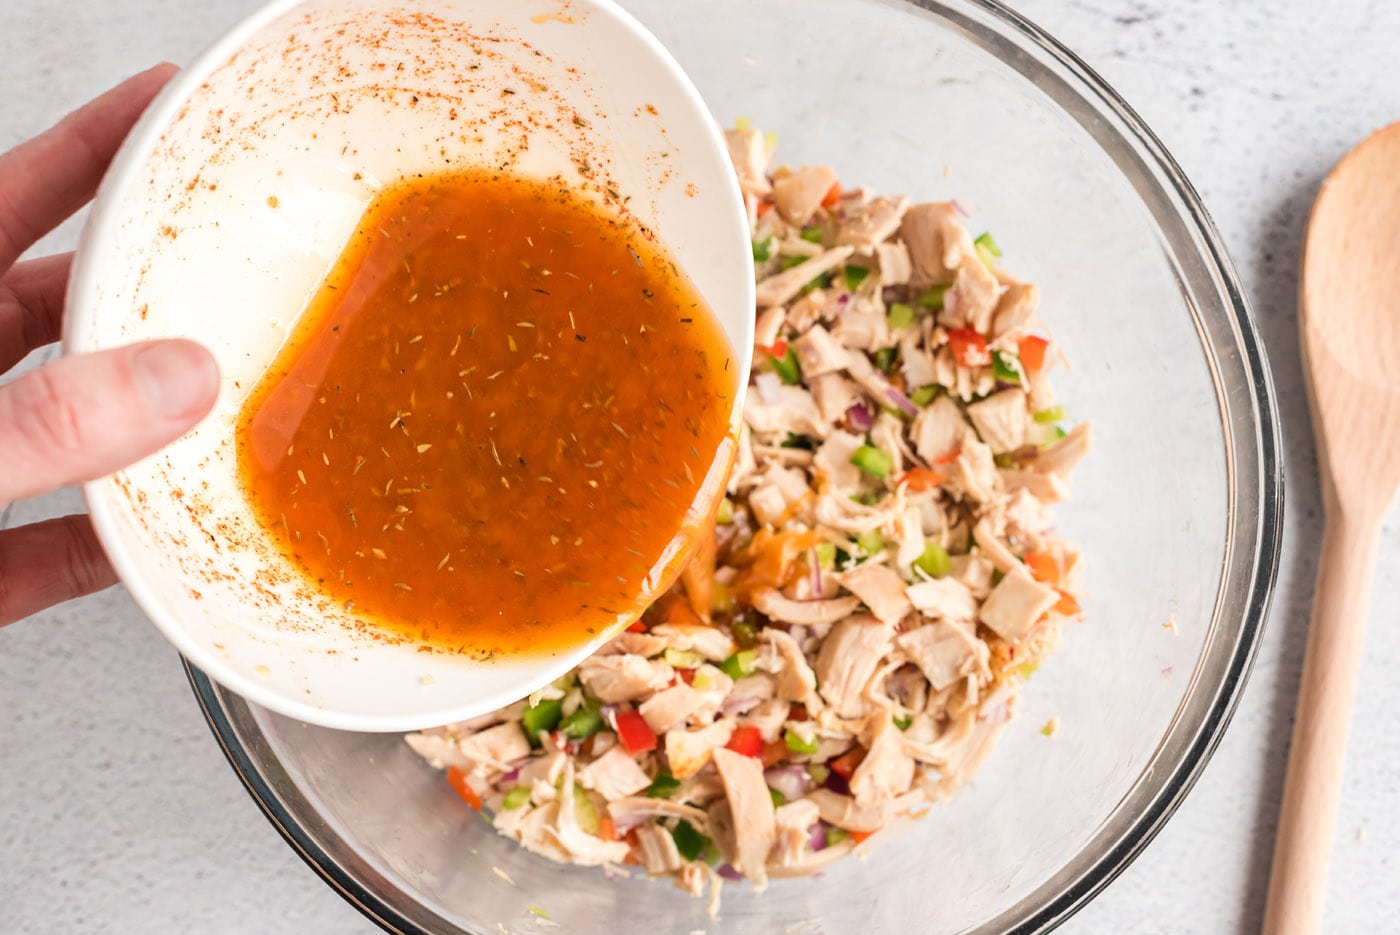 pouring cajun dressing over chicken salad